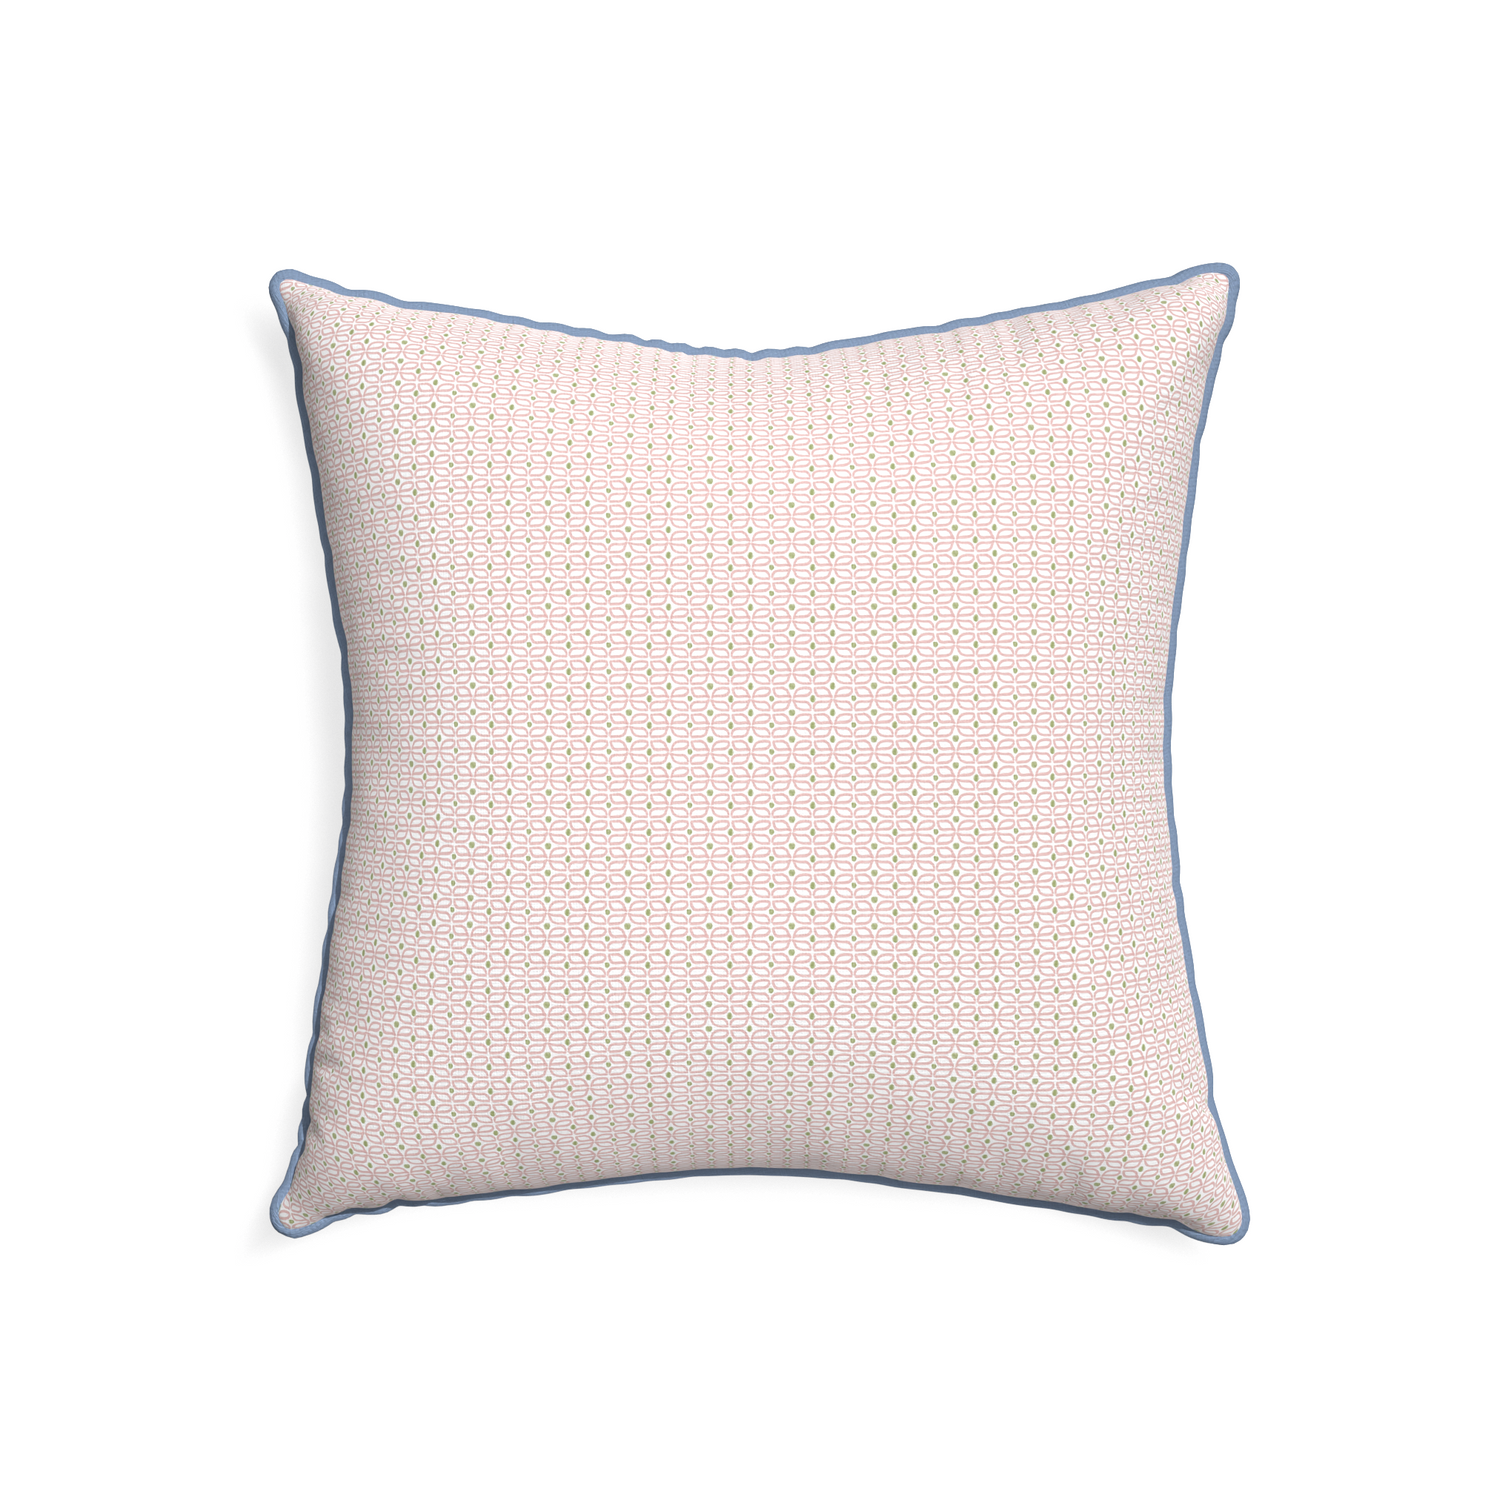 22-square loomi pink custom pink geometricpillow with sky piping on white background